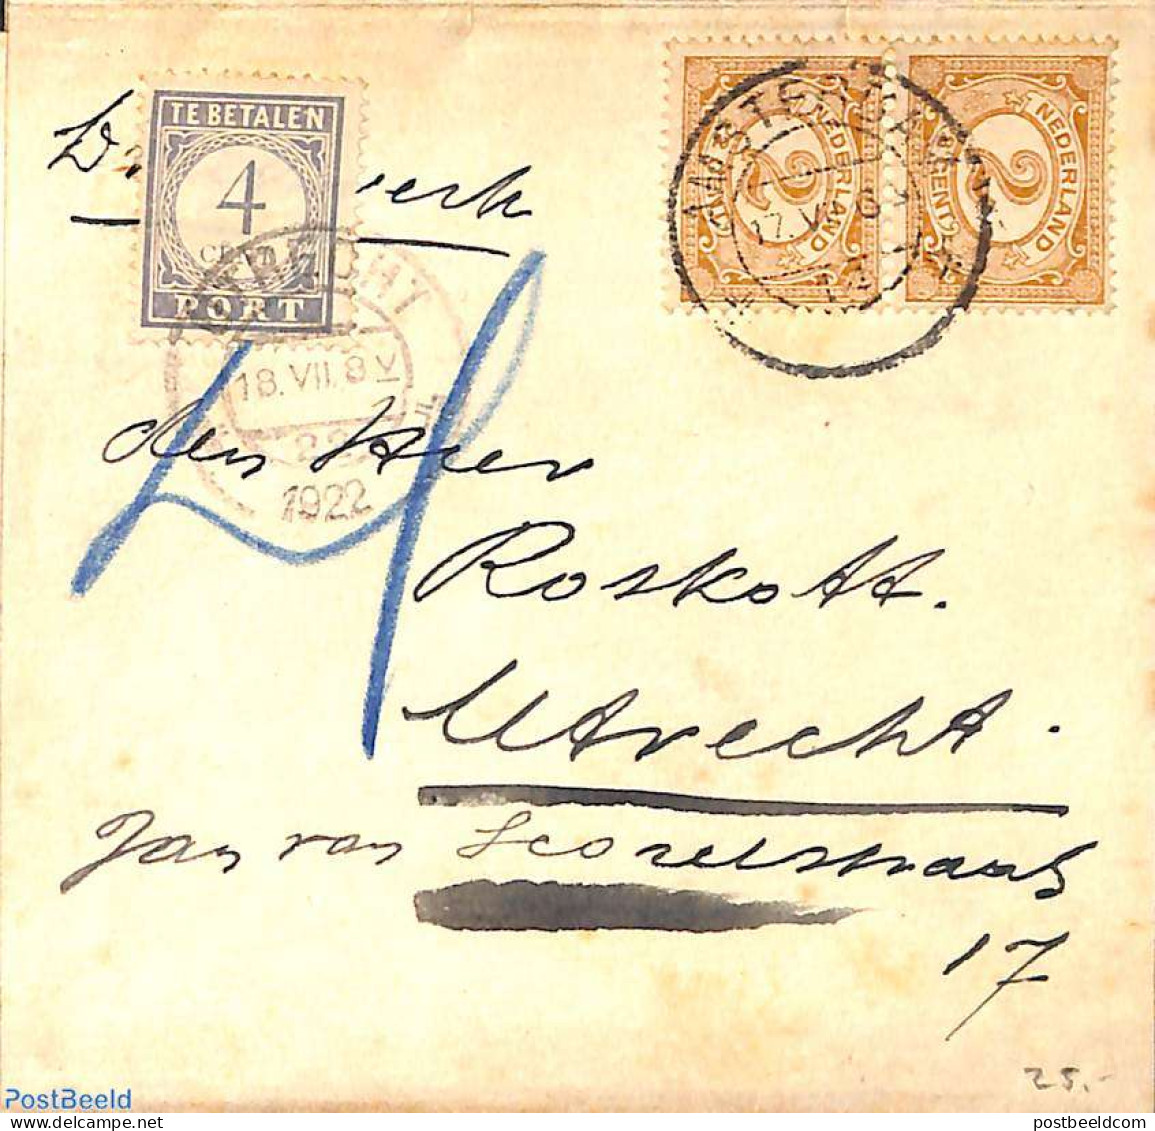 Netherlands 1922 Folding Letter To Utrecht, Postage Due 4c, Postal History - Covers & Documents